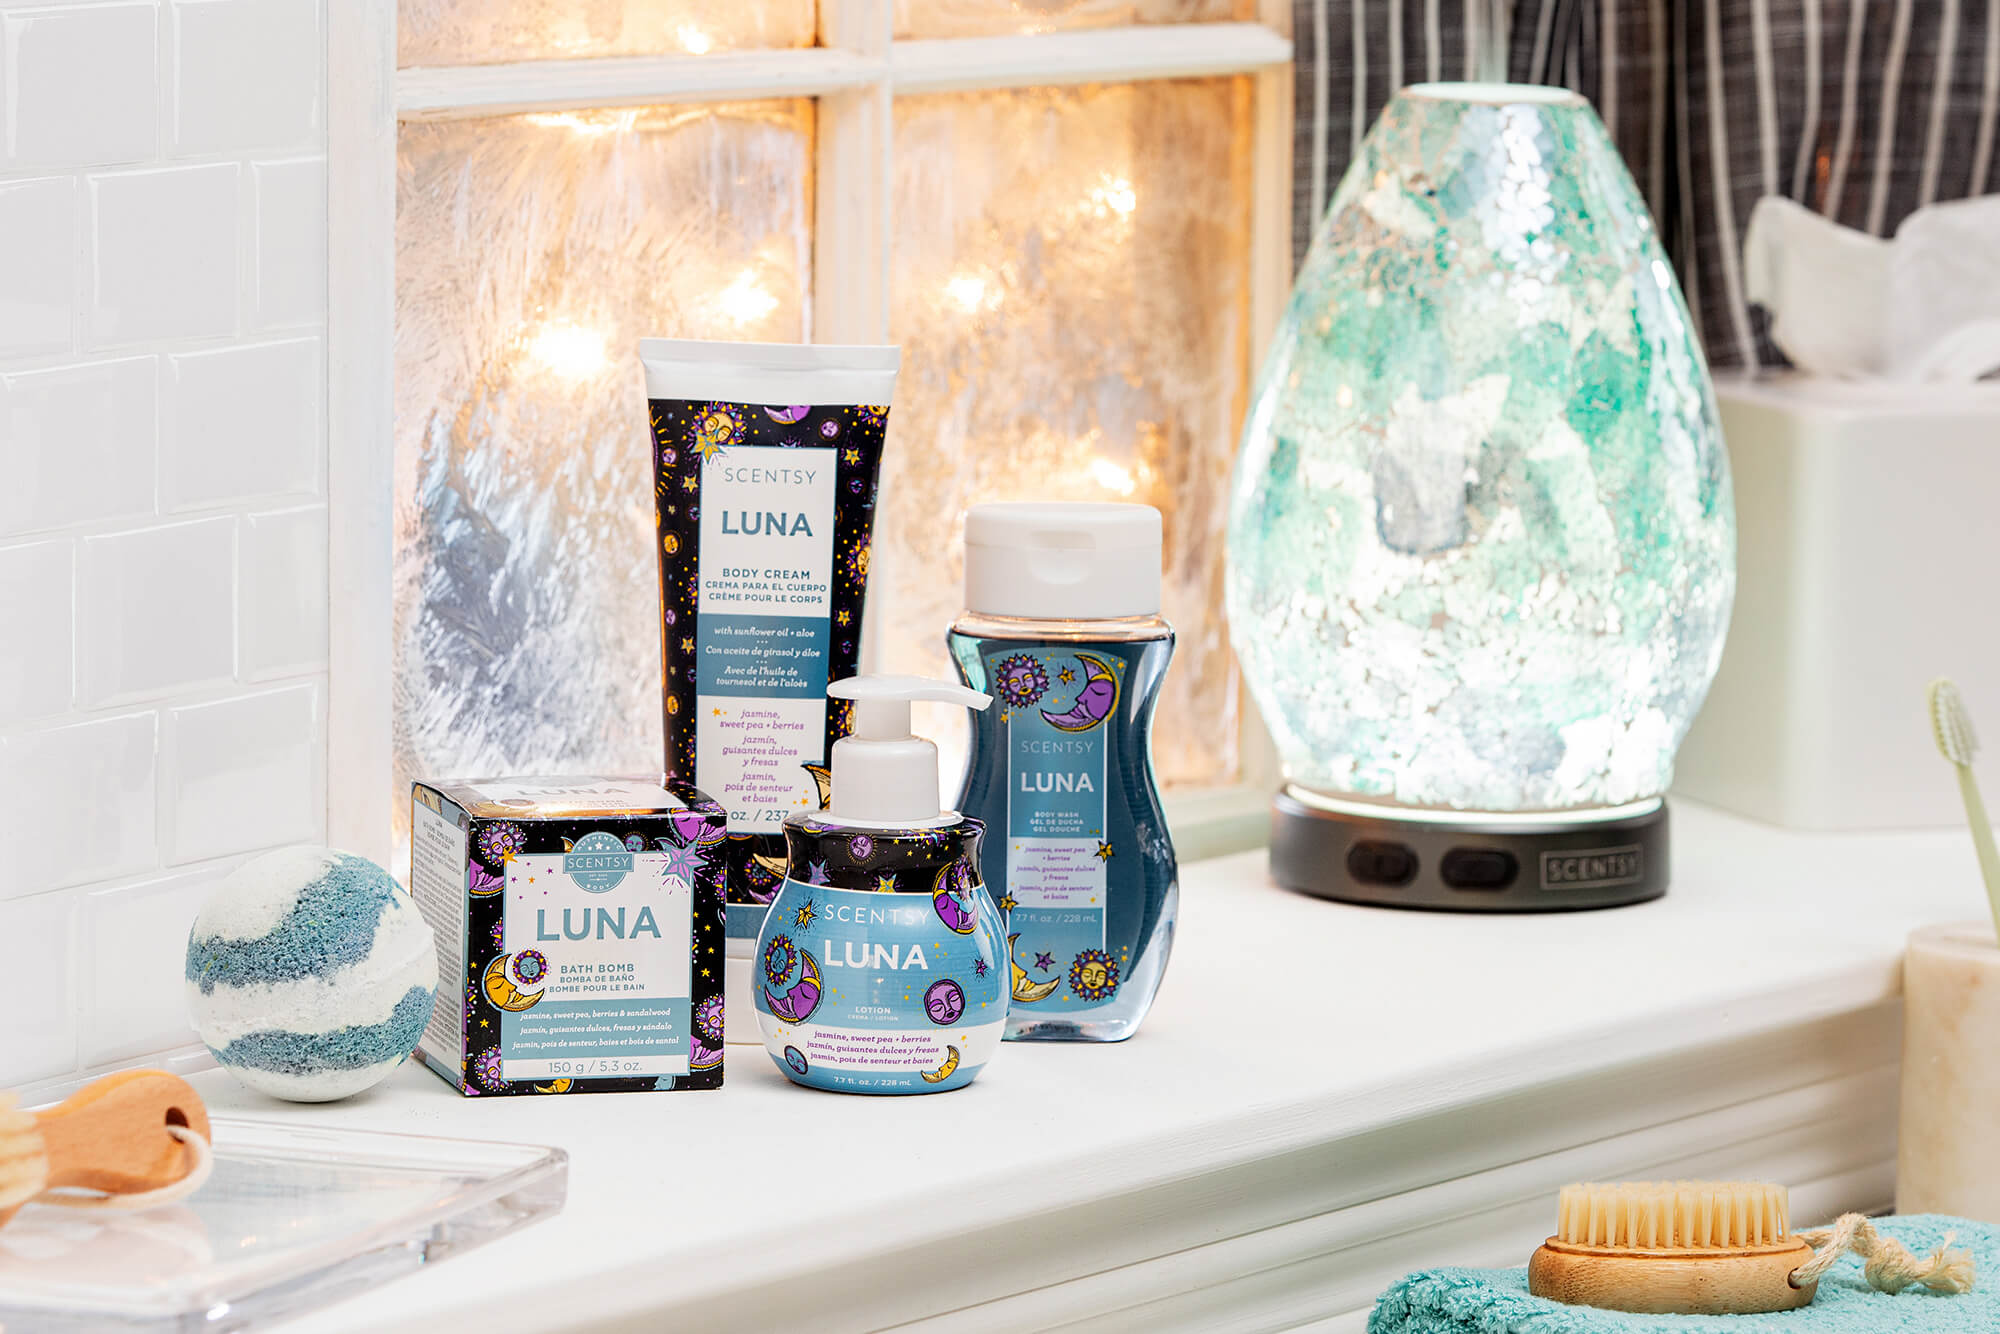 Scentsy body products scented in Luna fragrance and our Awaken oil diffuser all make for a relaxing home experience this winter